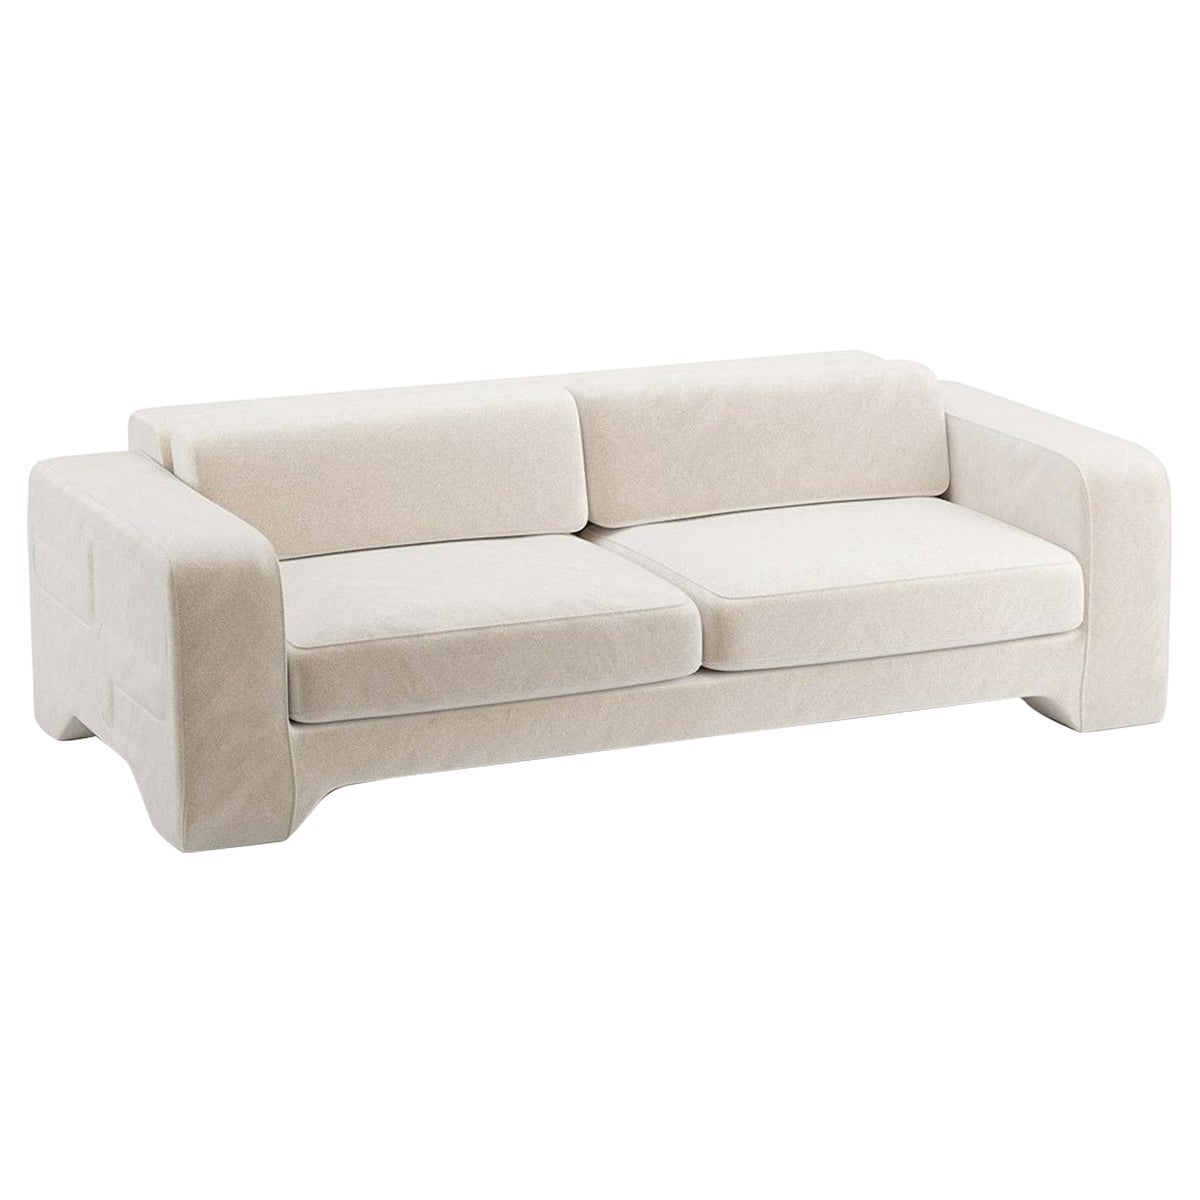 Popus Editions Giovanna 3 Seater Sofa in Egg Shell Off-White Como Velvet Fabric